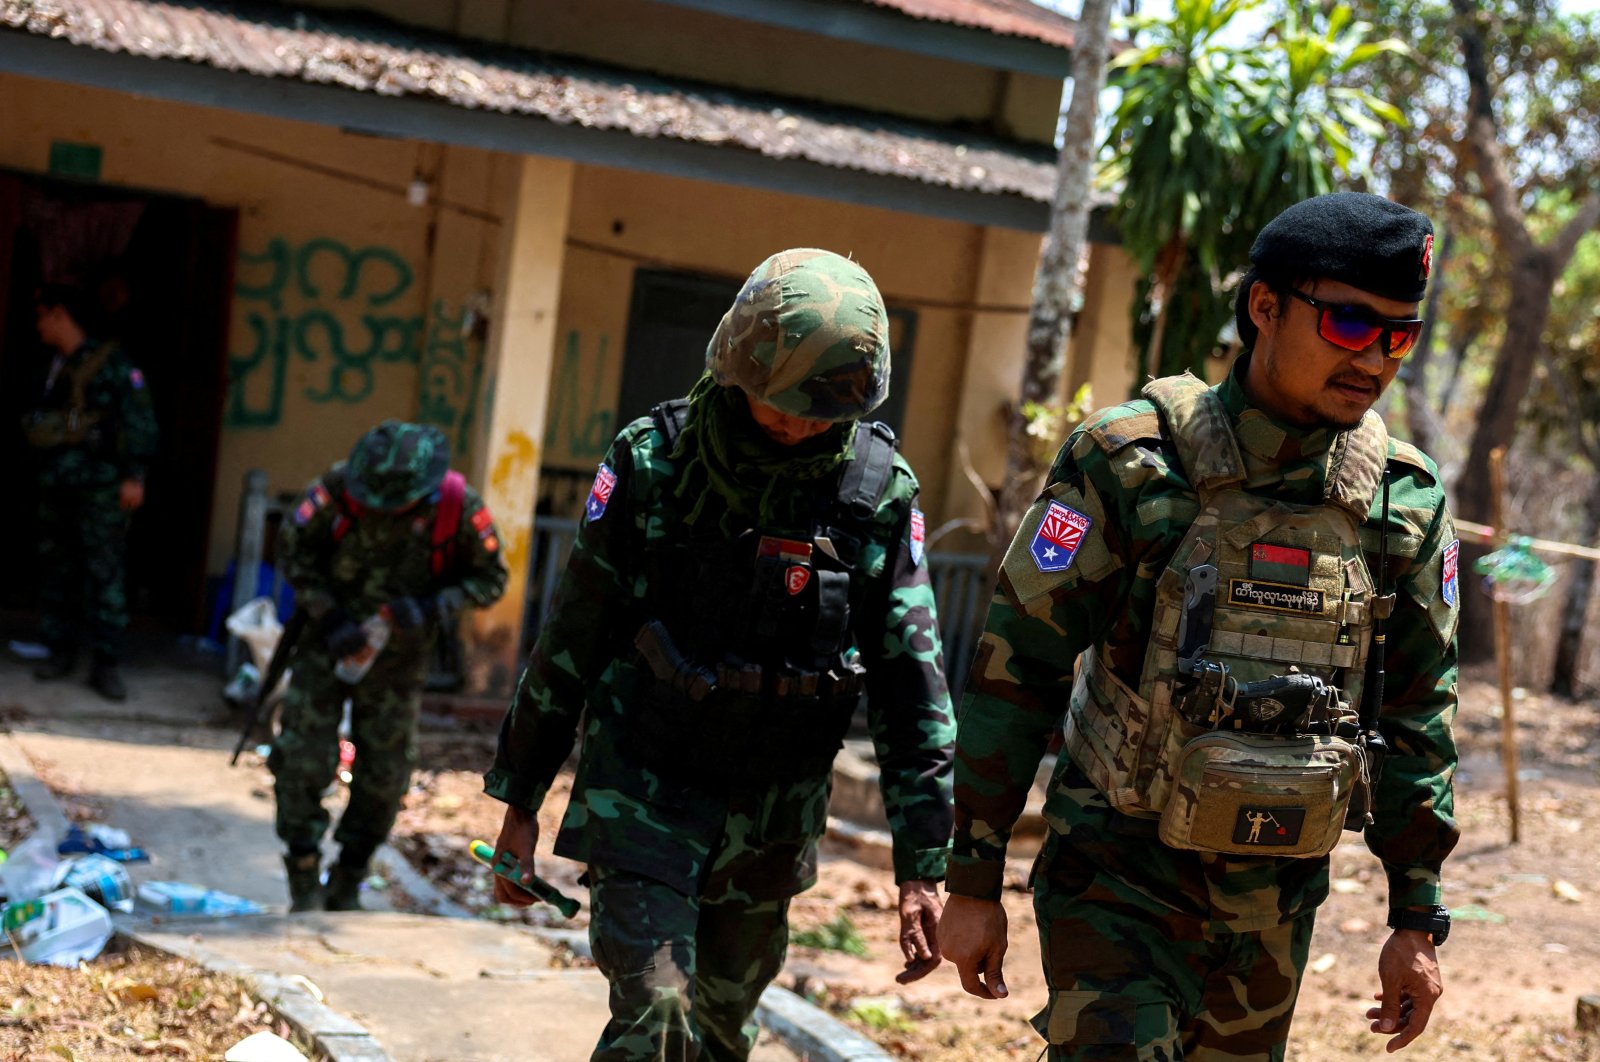 LT Saw Kaw, a soldier of the Karen National Liberation Army (KNLA) in charge of the Cobra column, walks with his team members after inspecting the house of a high-rank Myanmar soldier at Infantry Batallion 275, Myawaddy, Myanmar, April 15, 2024. (Reuters Photo)